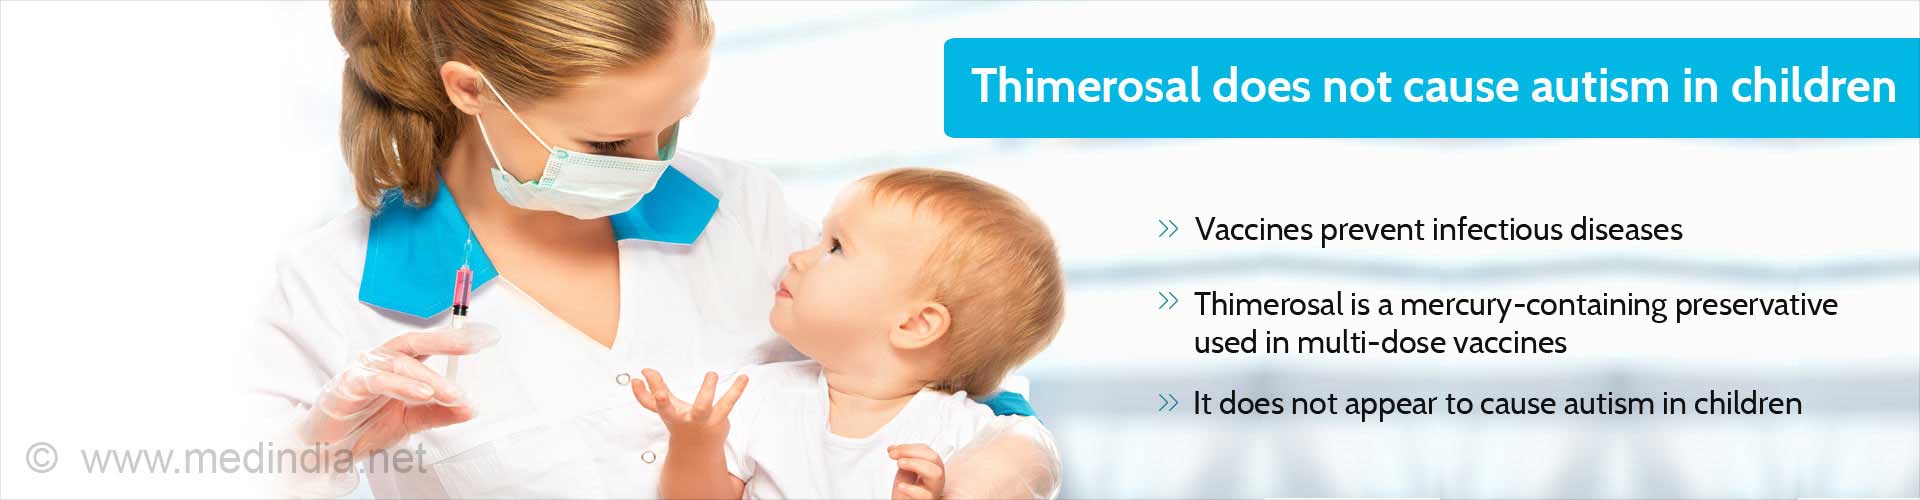 Thimerosal does not cause autism in children
- Vaccines prevent infectious diseases
- Thimerosal is a mercury-containing preservative used in multi-dode vaccines
- It does not appear to cause autism in children